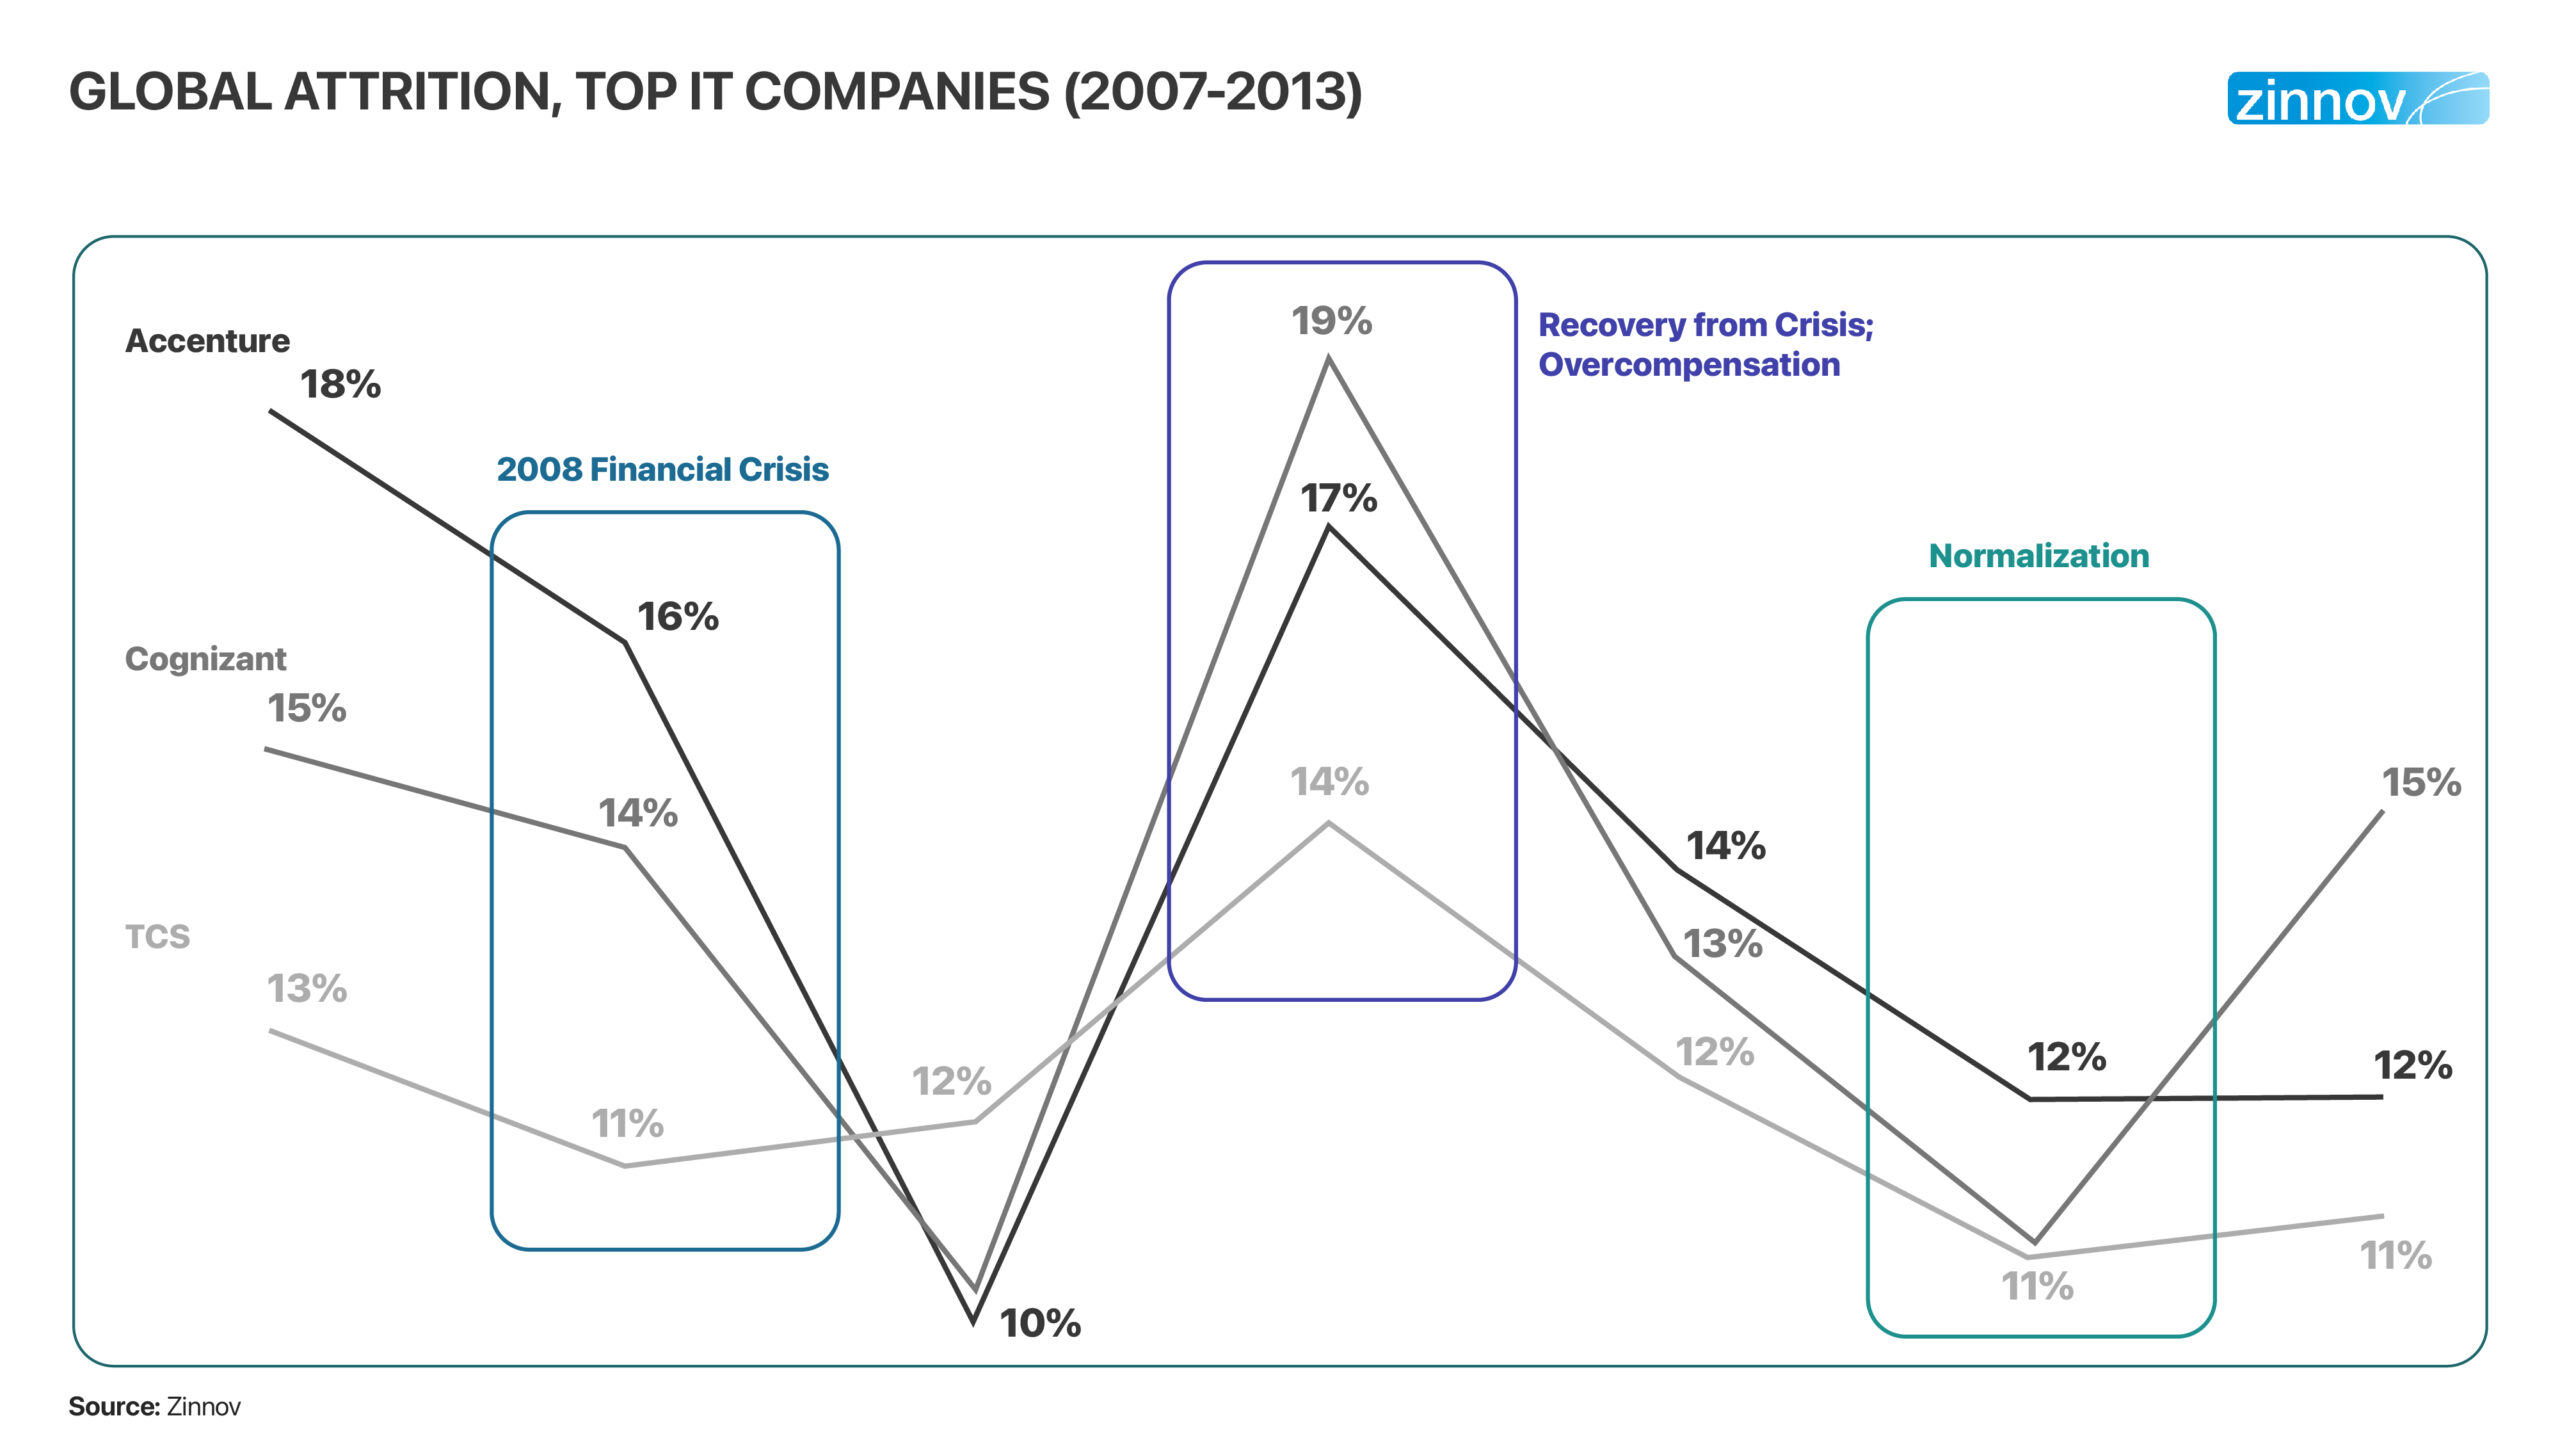 Global attrition in top IT companies ( 2007-2013)